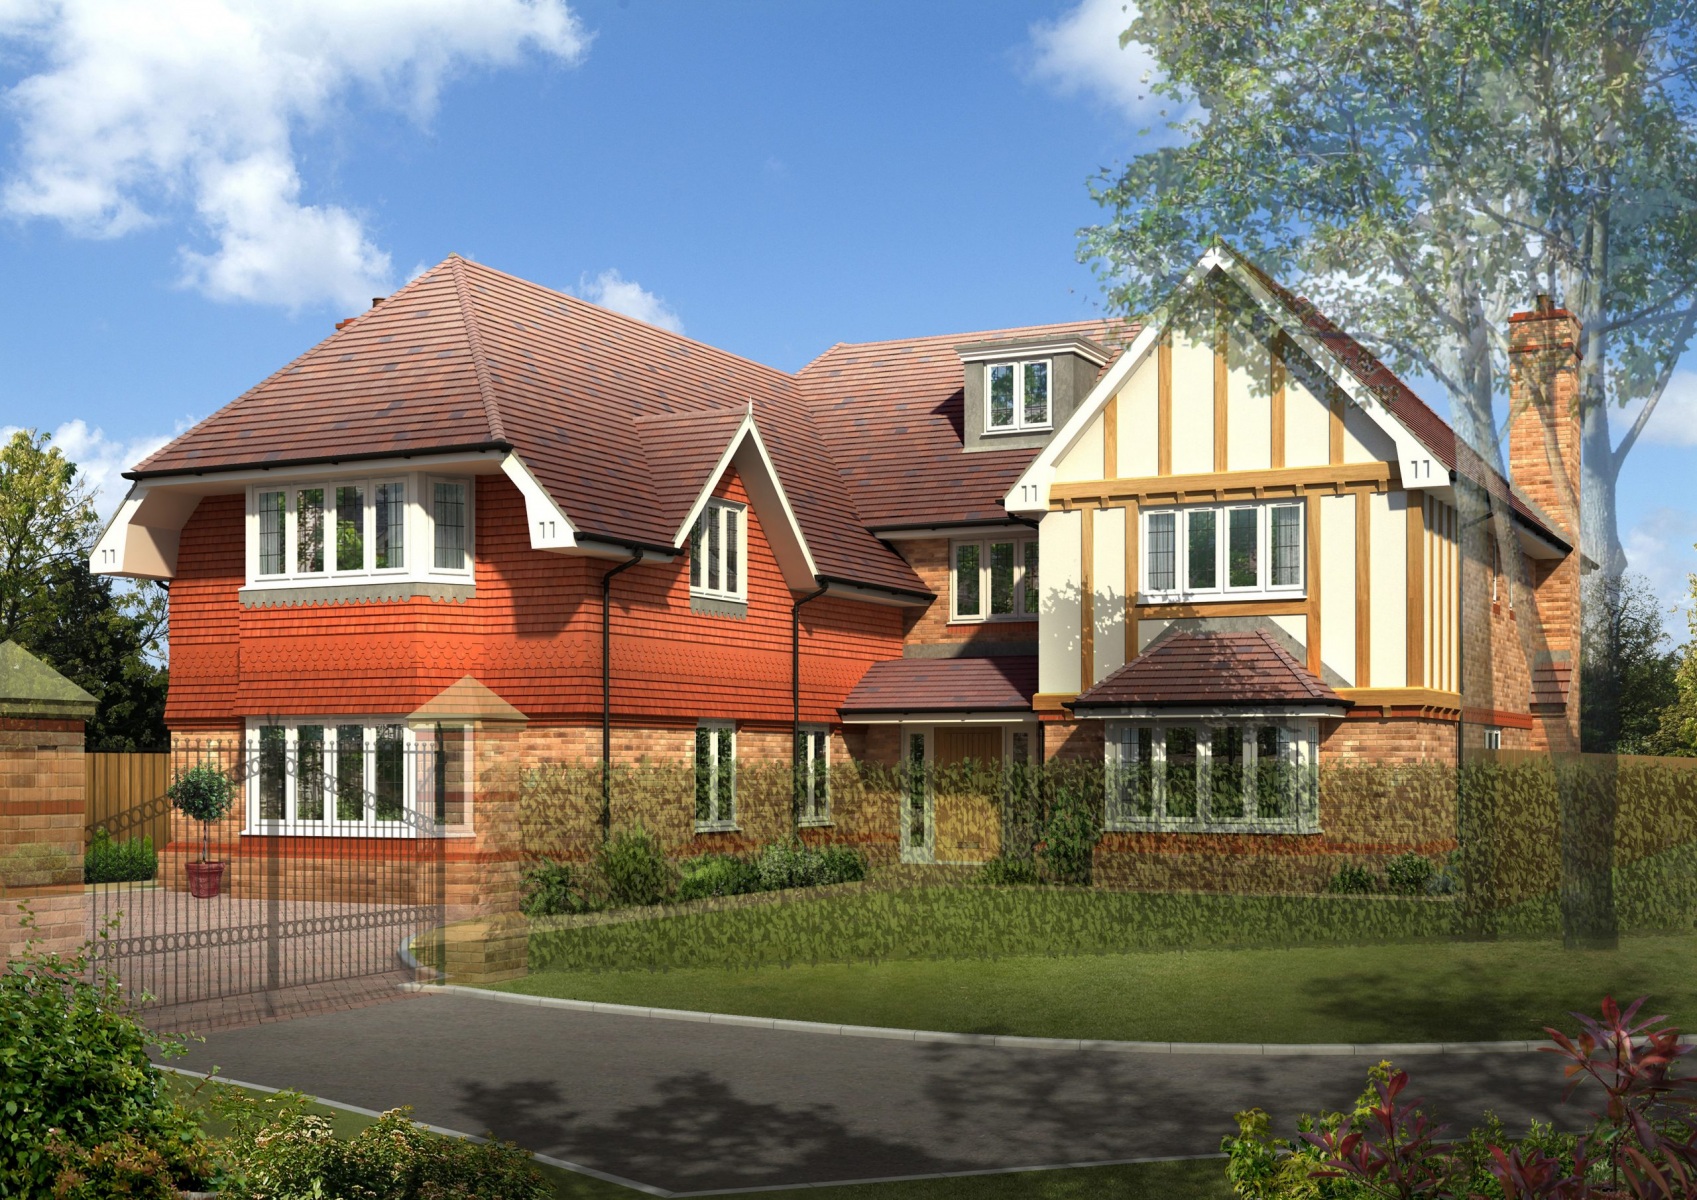 3 Story timber frame house with basement in Holmer Green